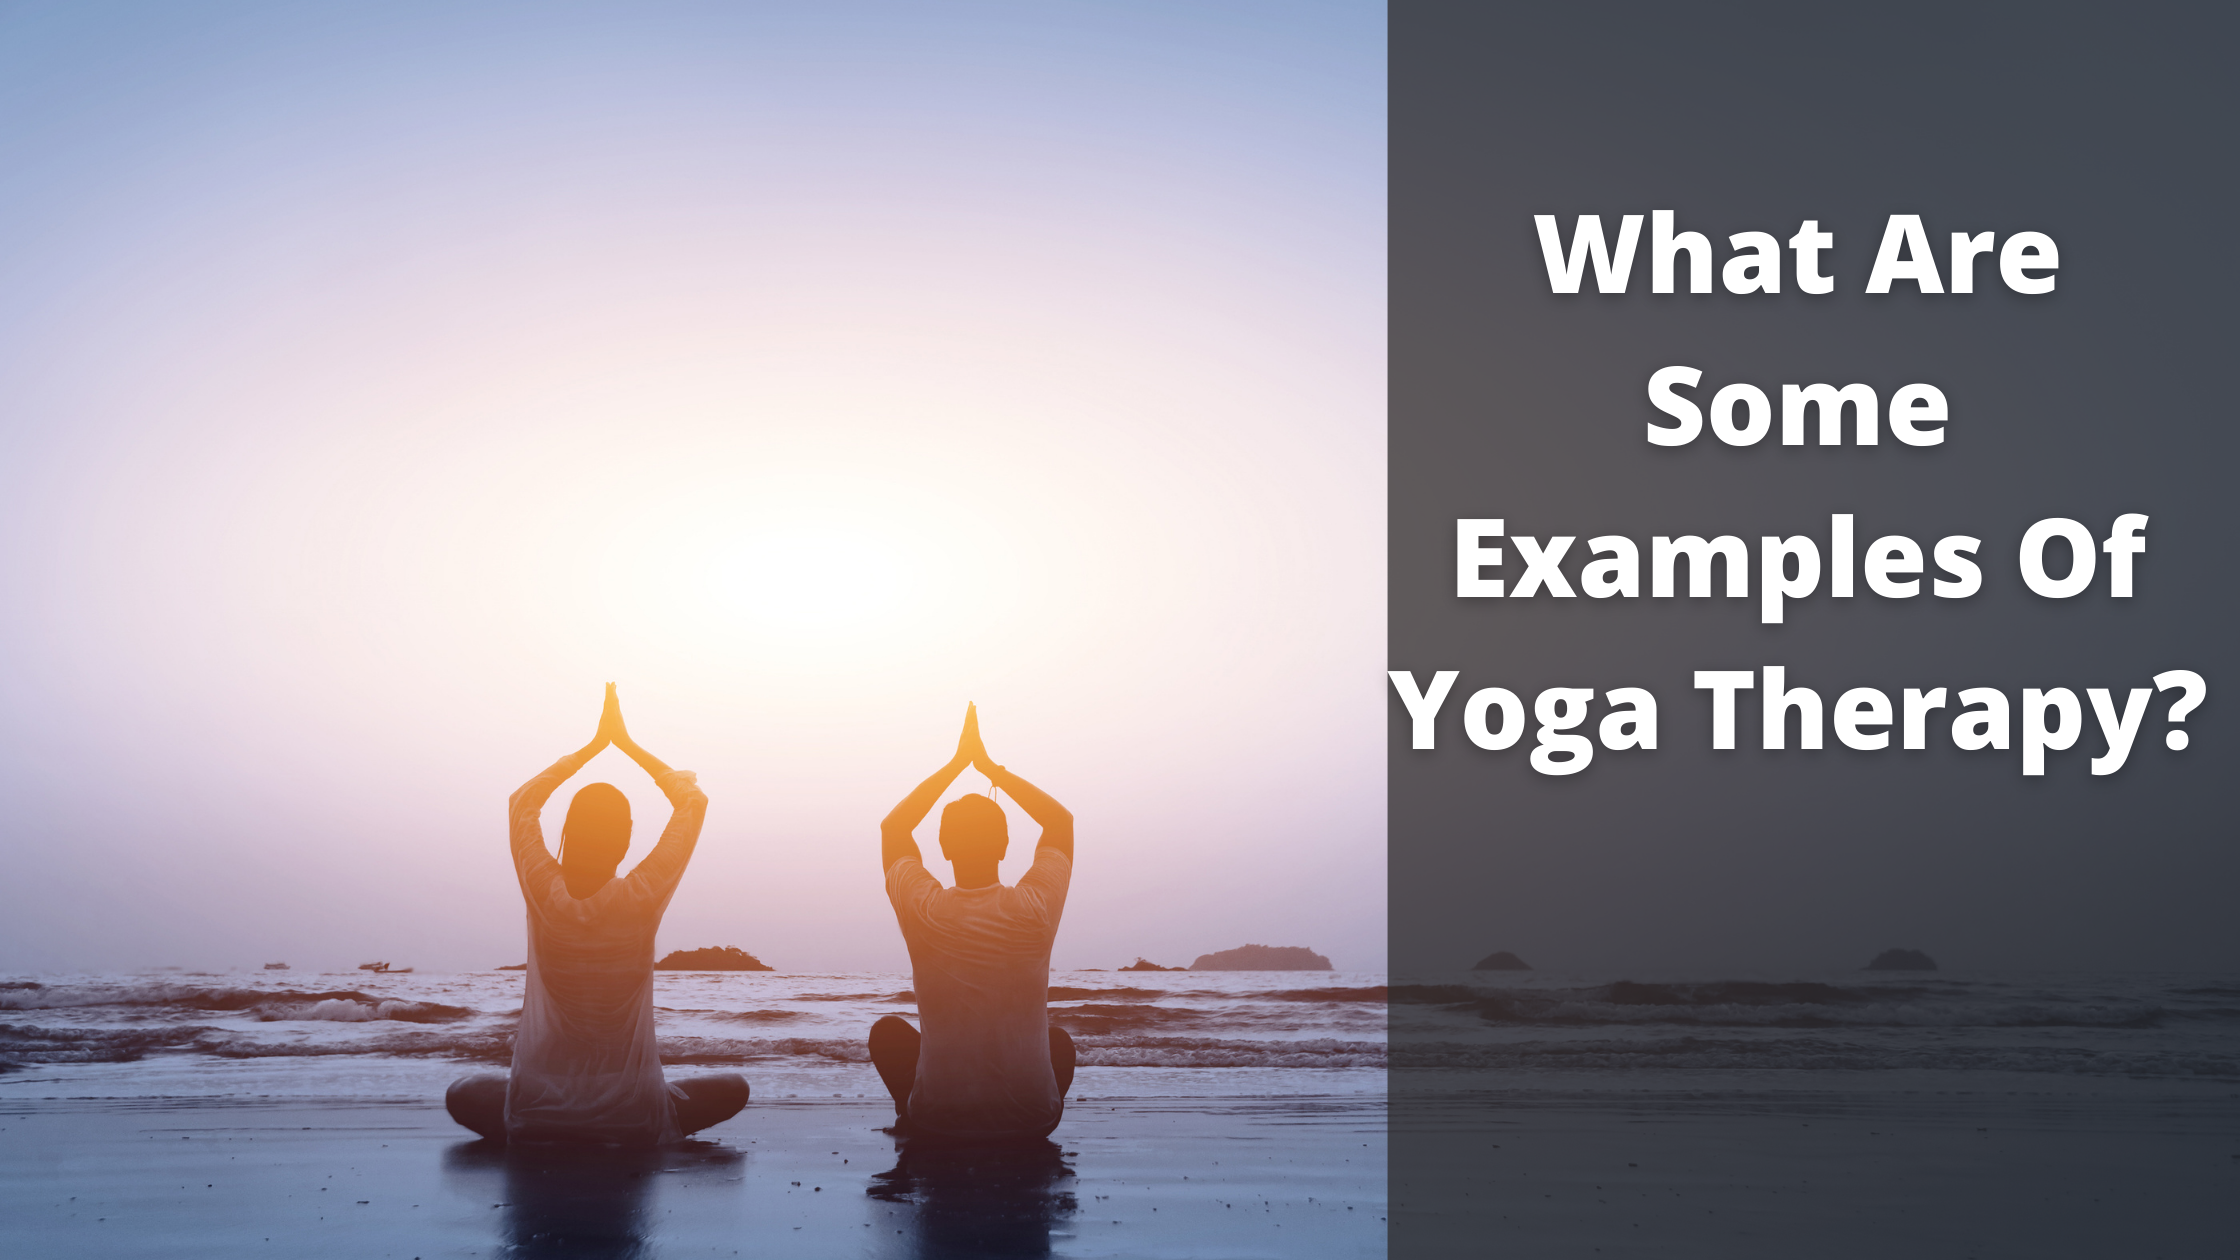 What Are Some Examples of Yoga Therapy? 